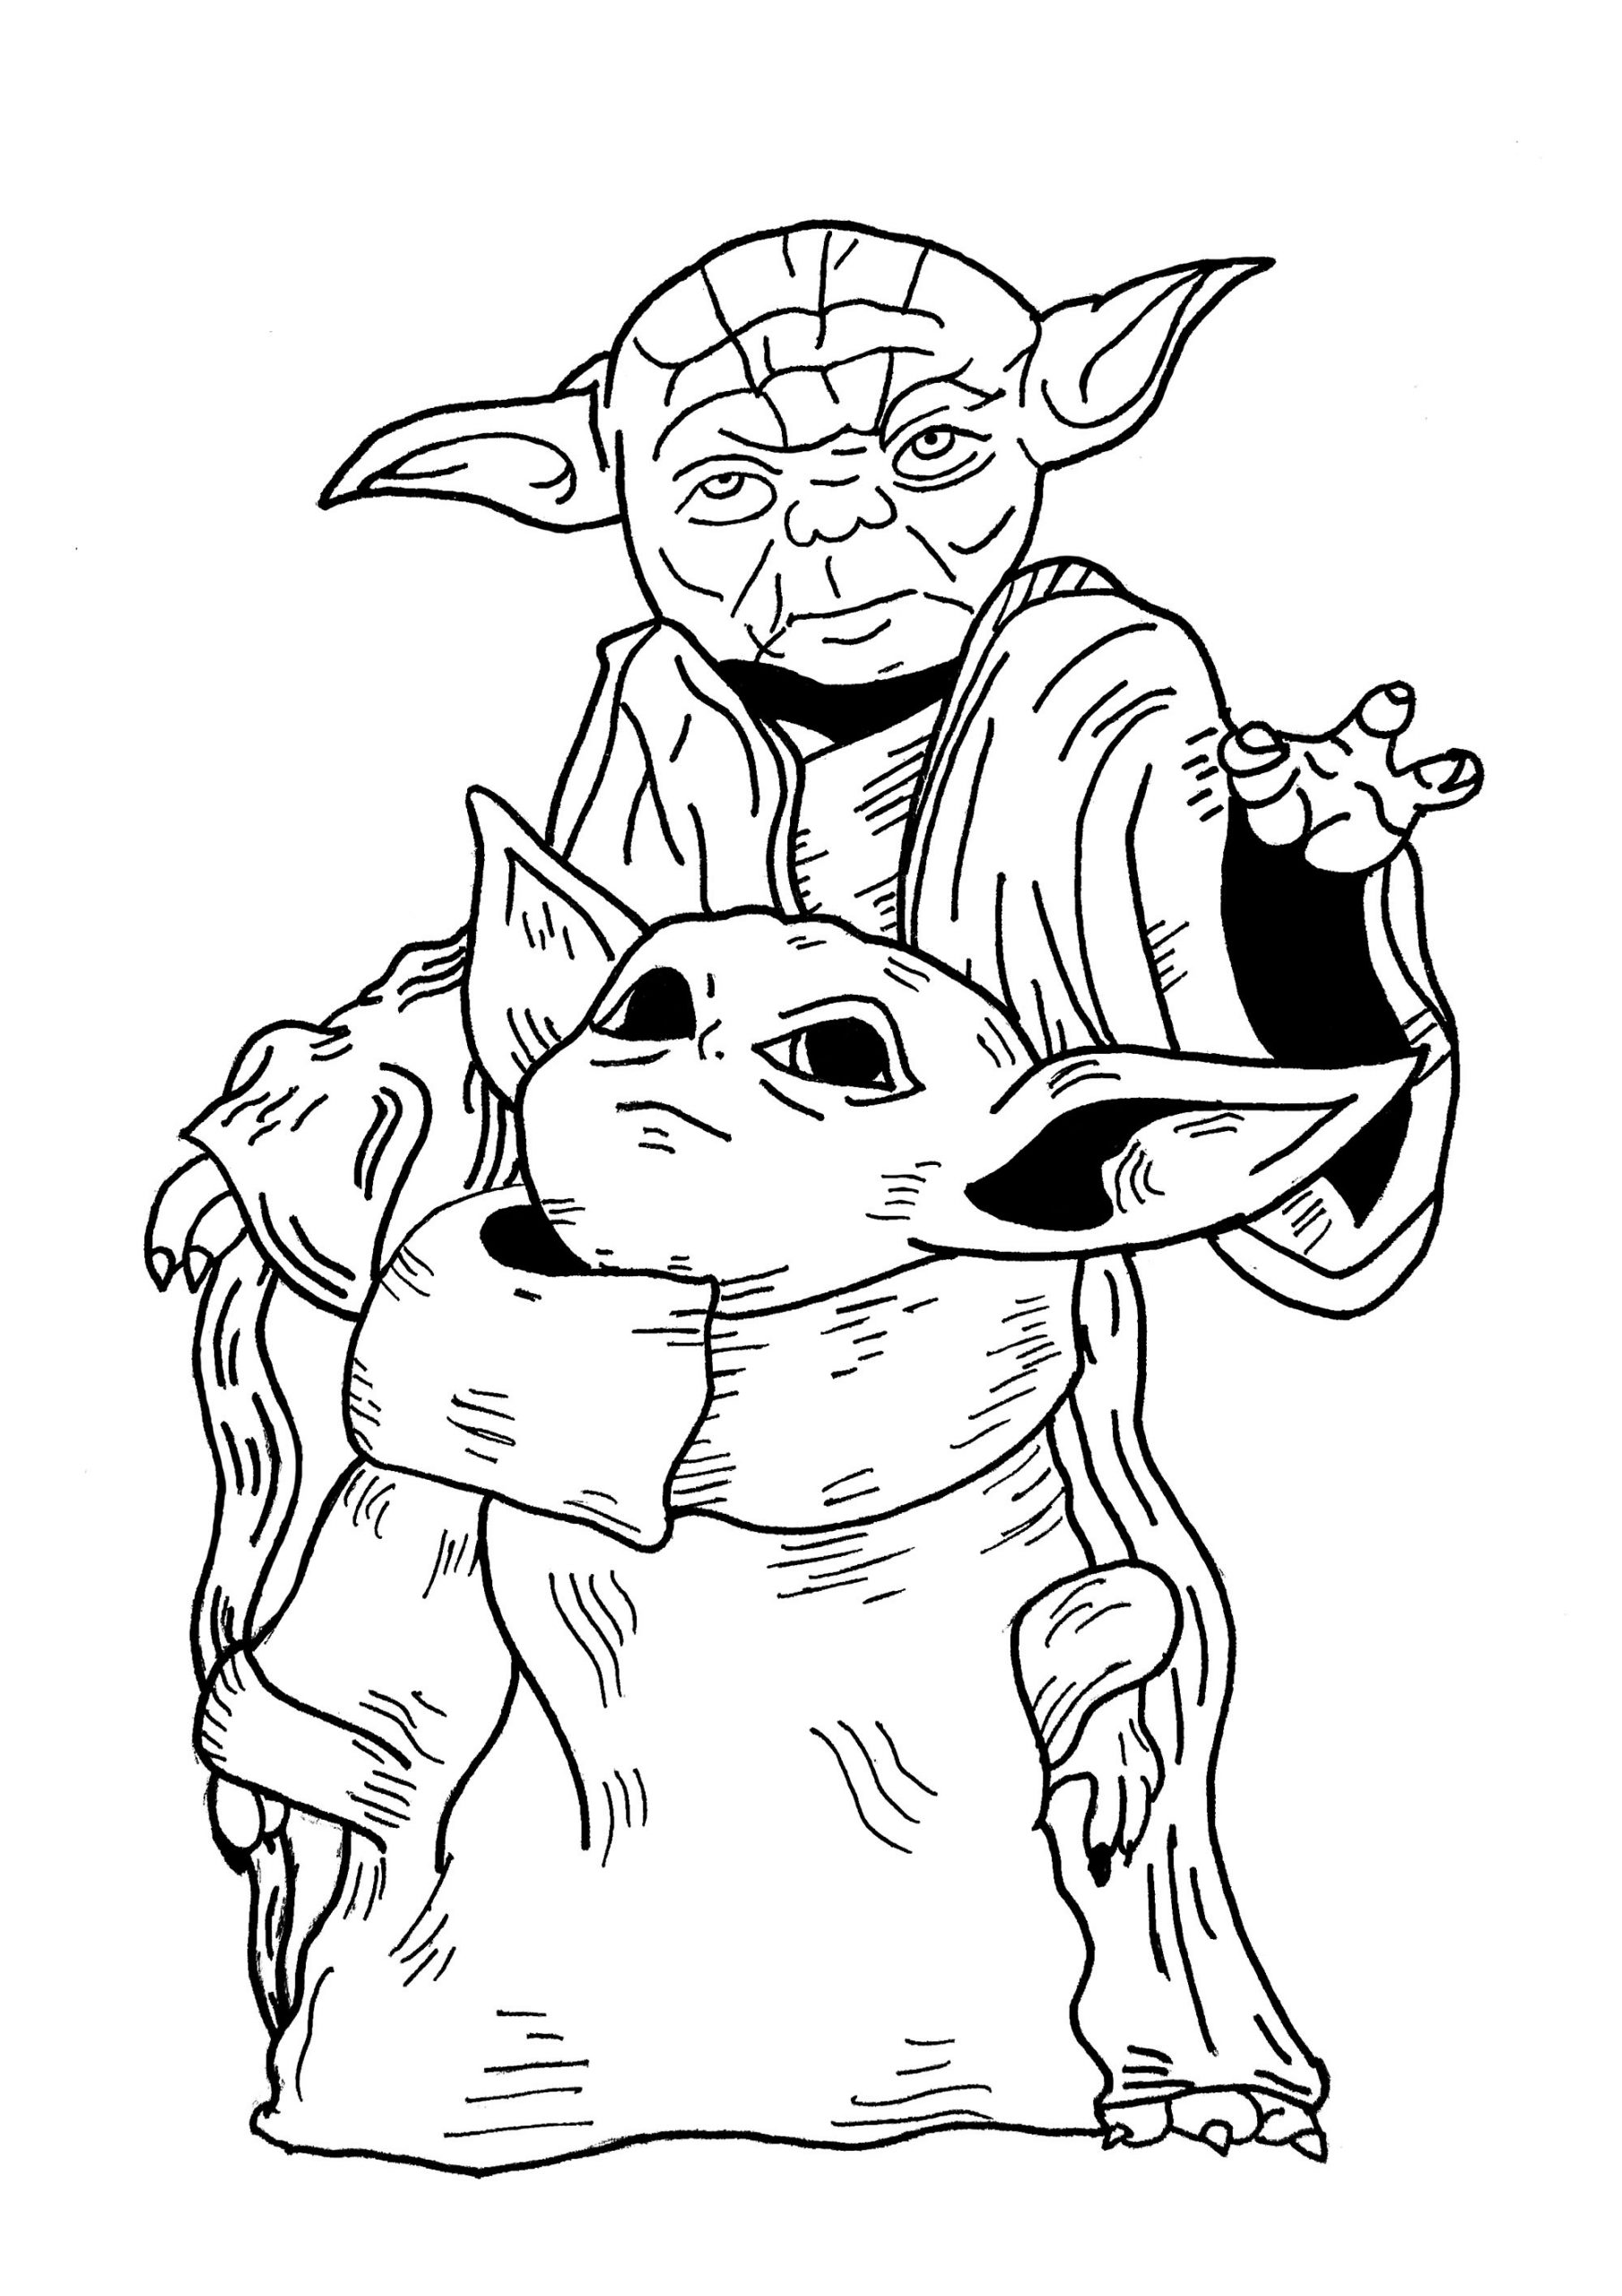 master-yoda-and-baby-yoda-star-wars-coloring-pages-small-yet-powerful